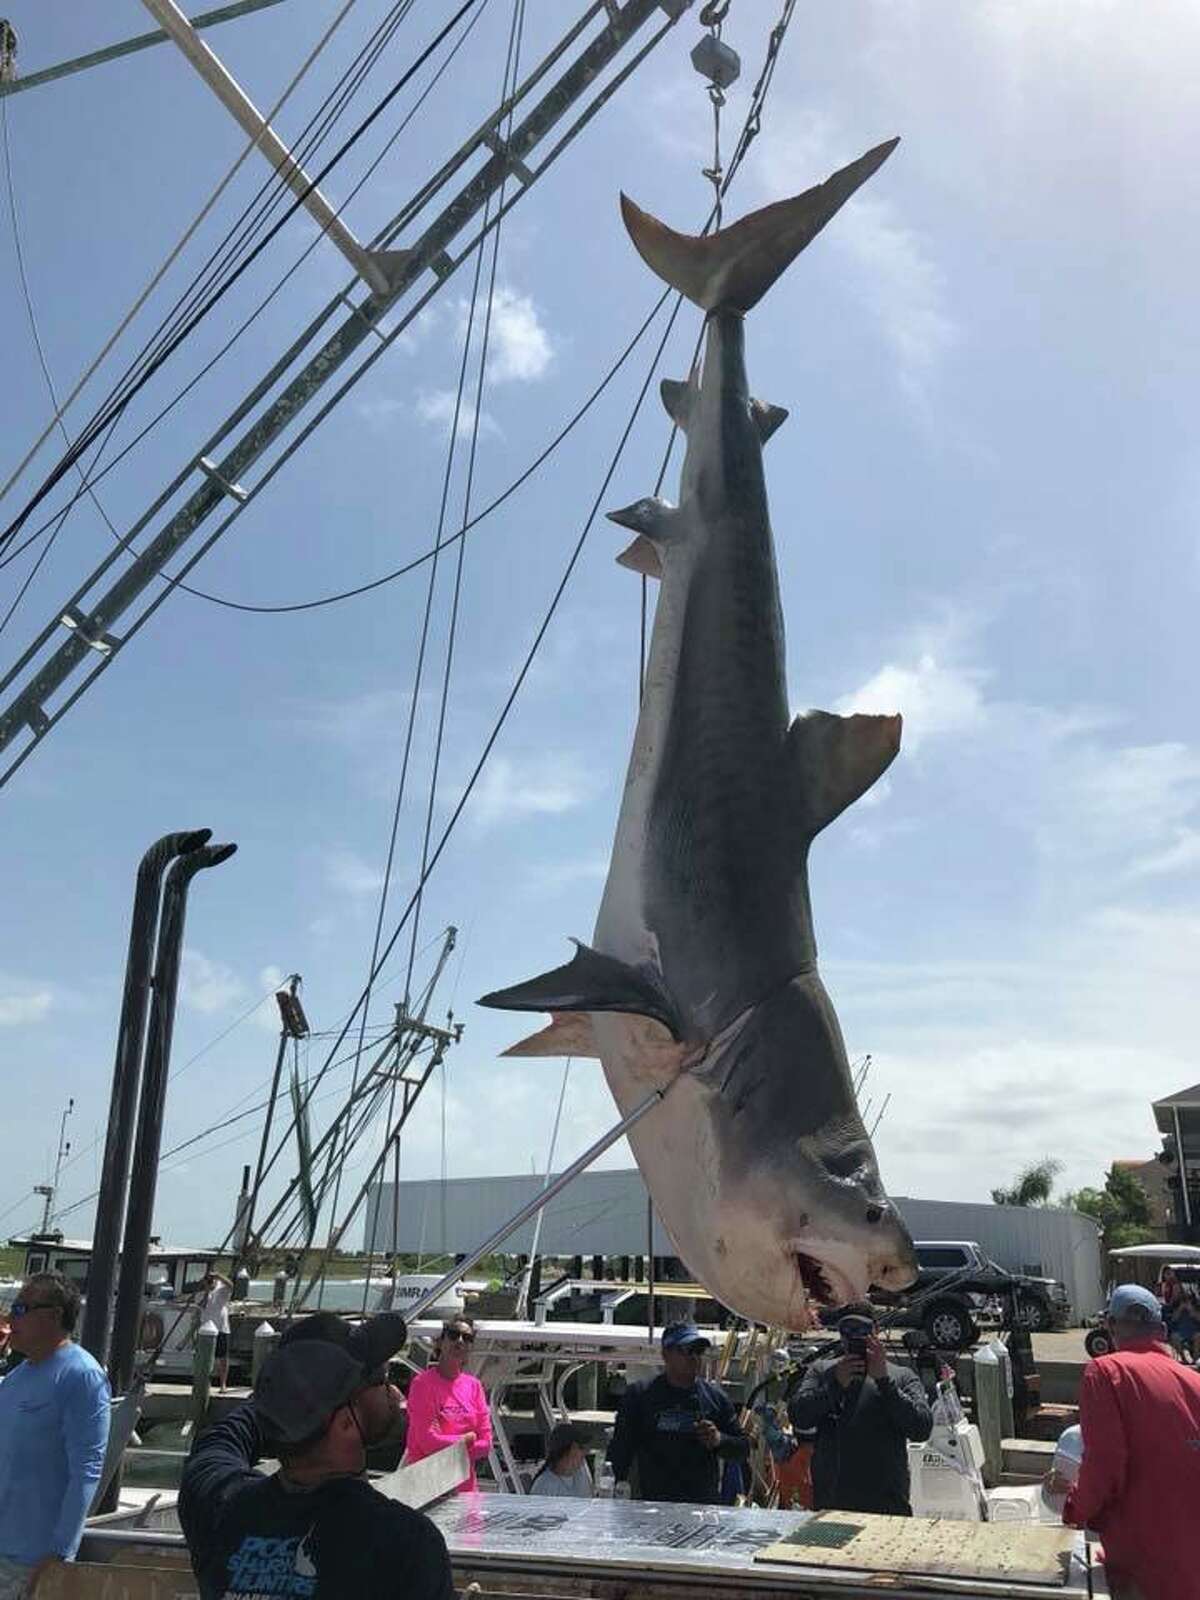 A team of anglers participating in a Port O'Connor fishing tournament reeled in a 12-foot tiger shark on Saturday. Keep clicking to see some of the record fish caught in Texas.